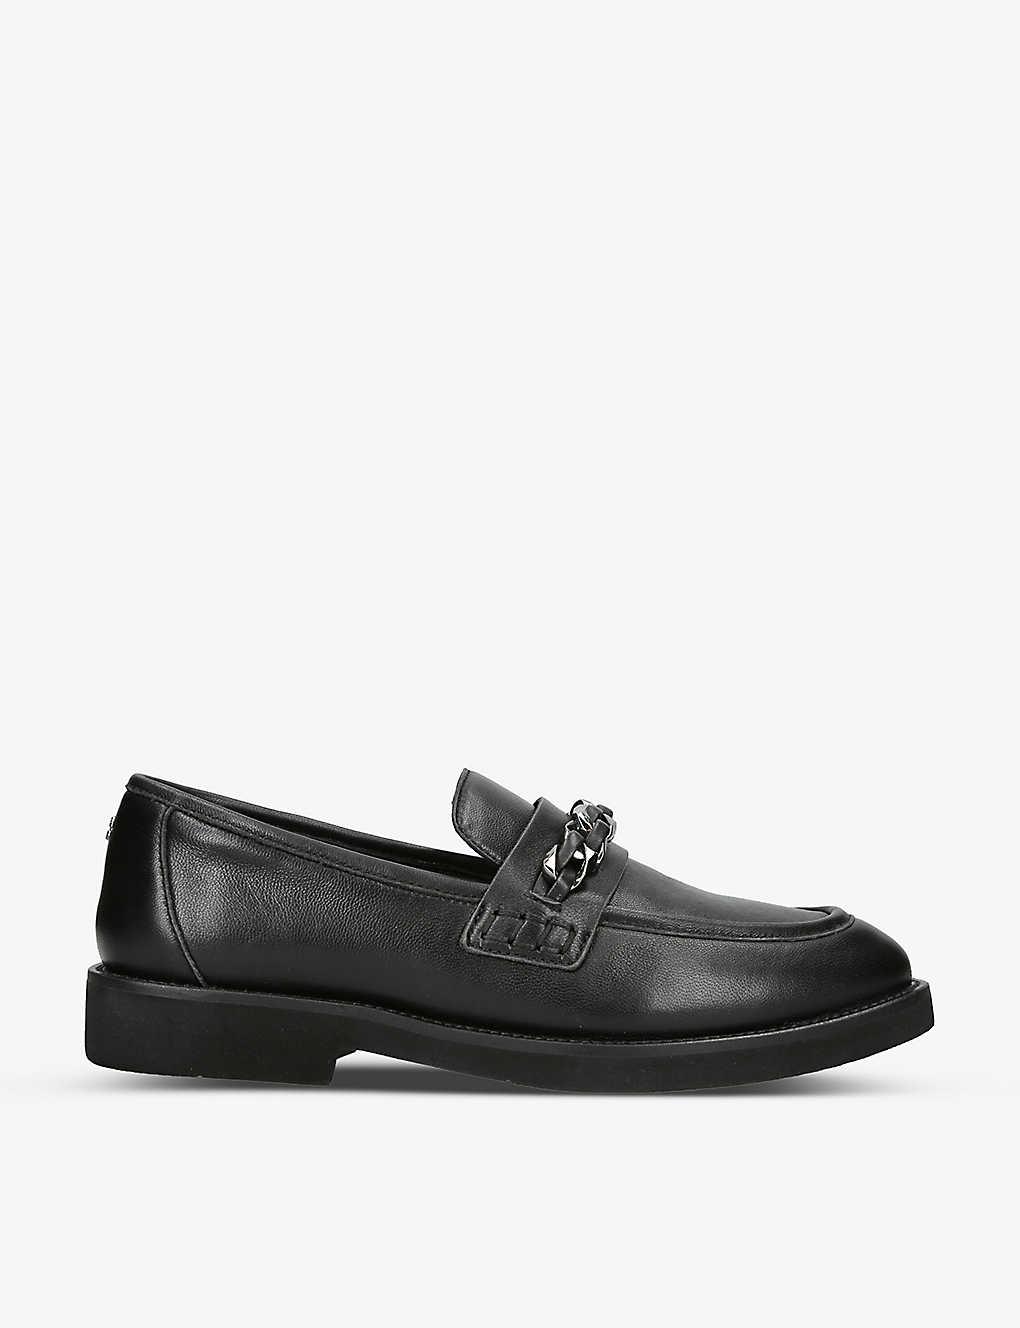 Carvela Kurt Geiger Reaction Chain Leather Loafers in Black | Lyst